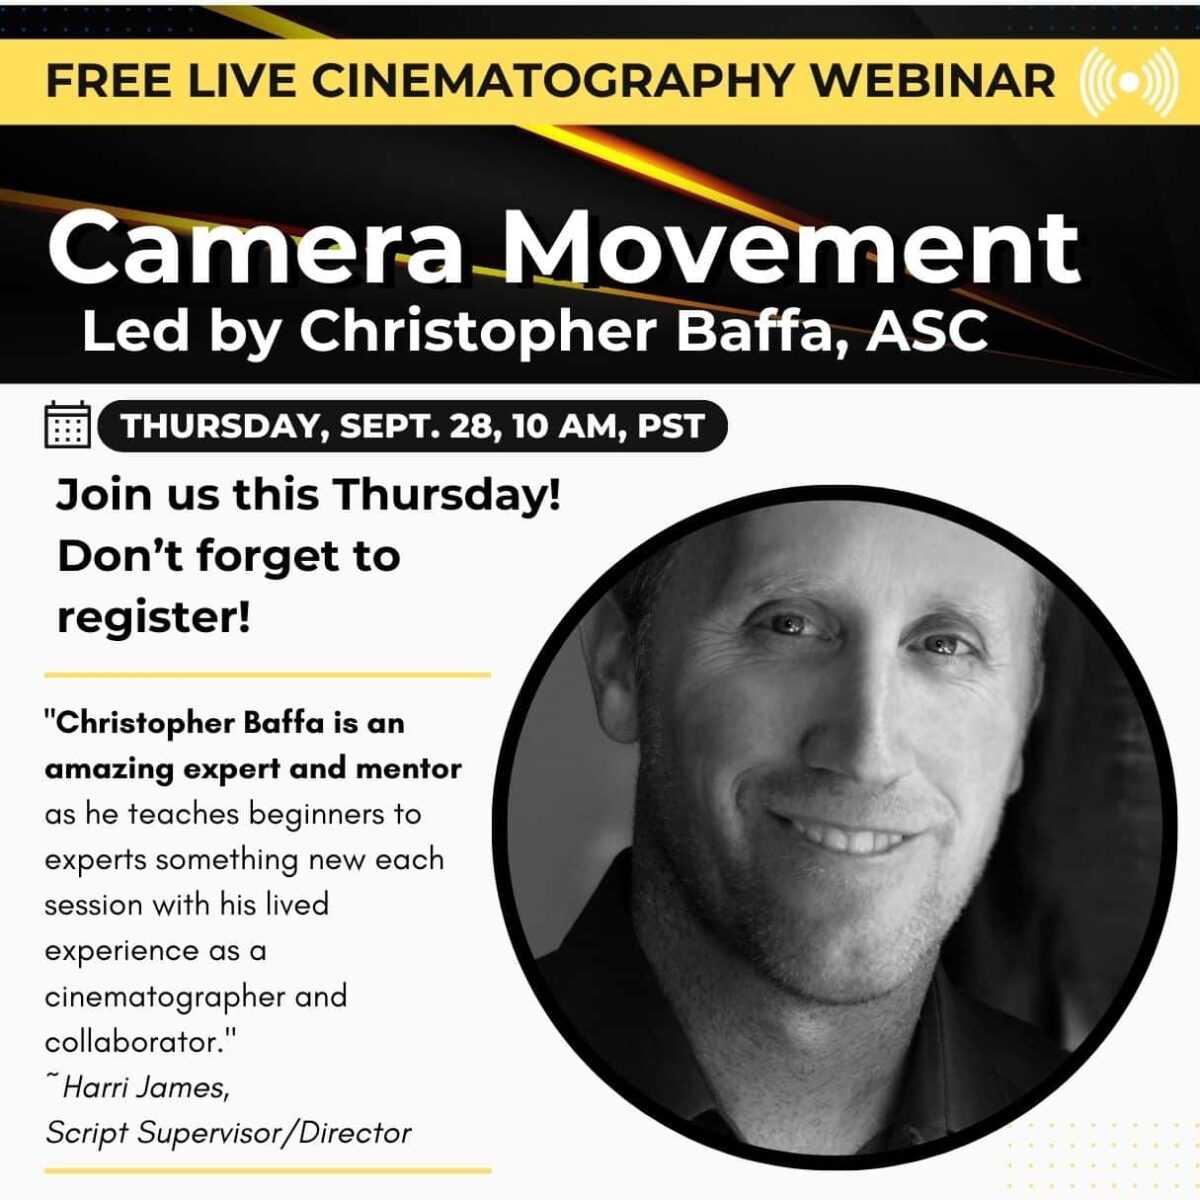 Camera Movement Cinematography Webinar with Christopher Baffa ASC, hosted by Student Filmmakers Magazine